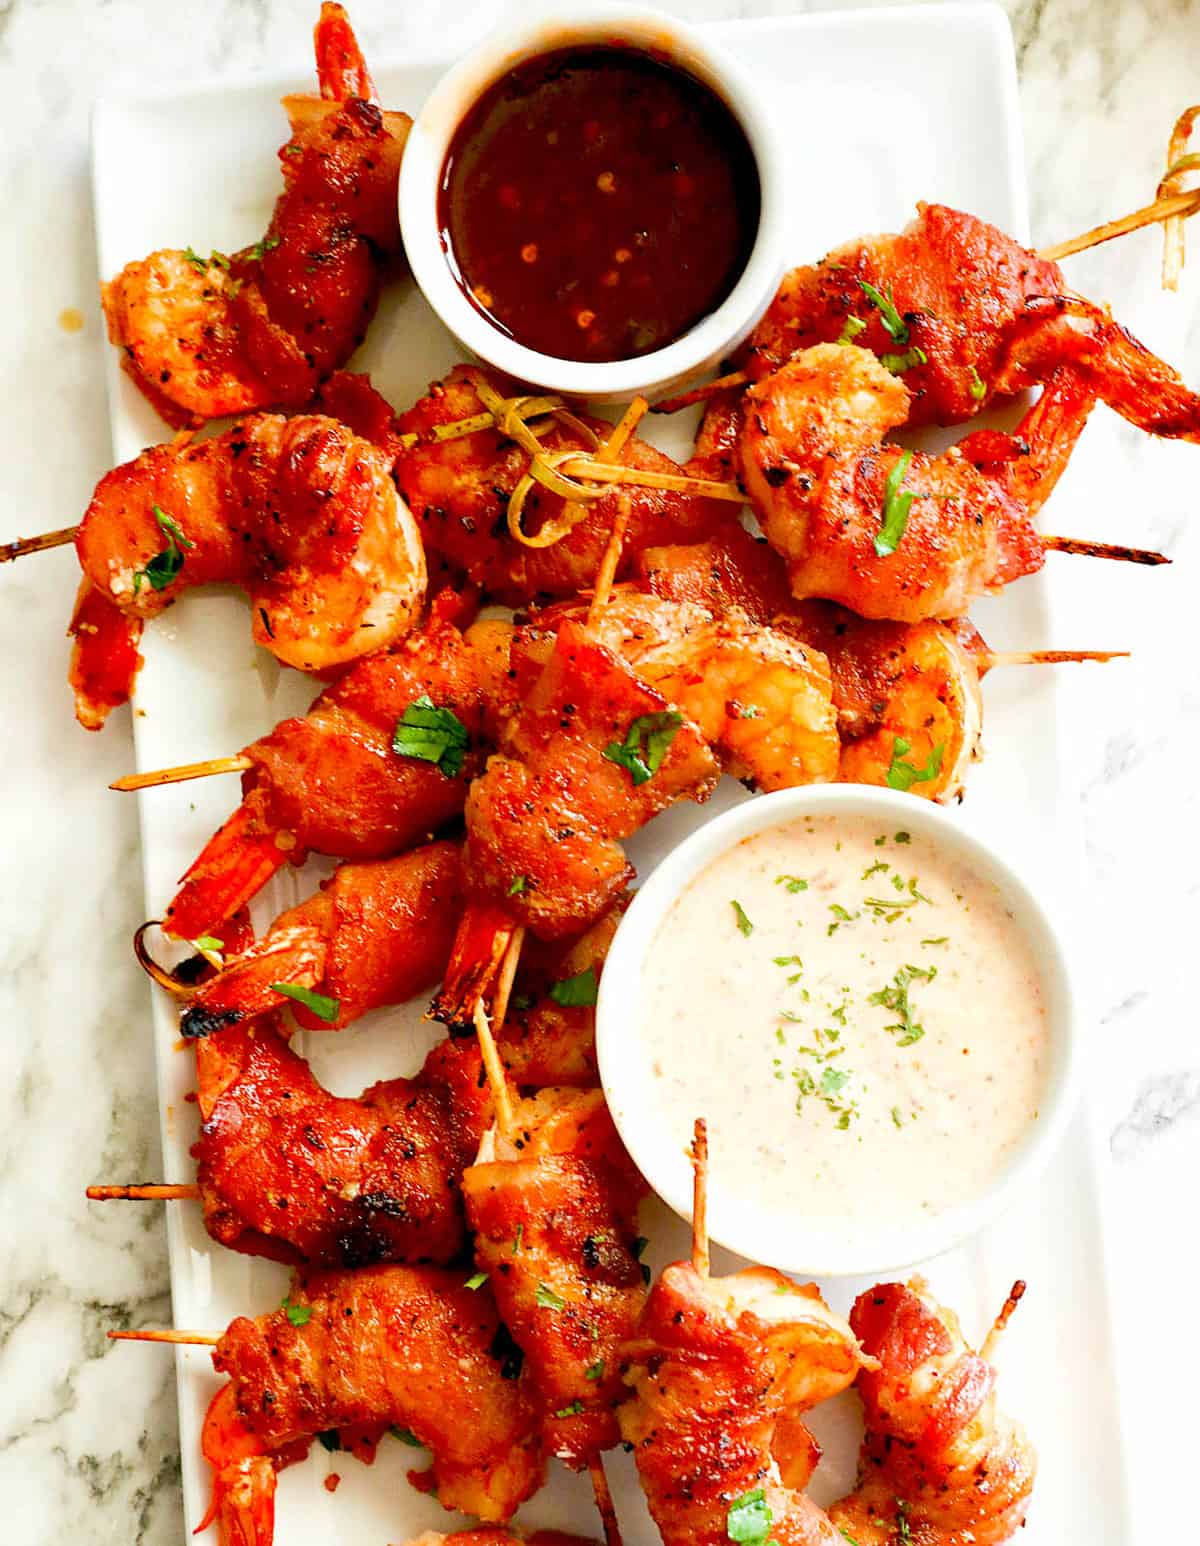 Shrimp wrapped in bacon with remoulade and hot sauce